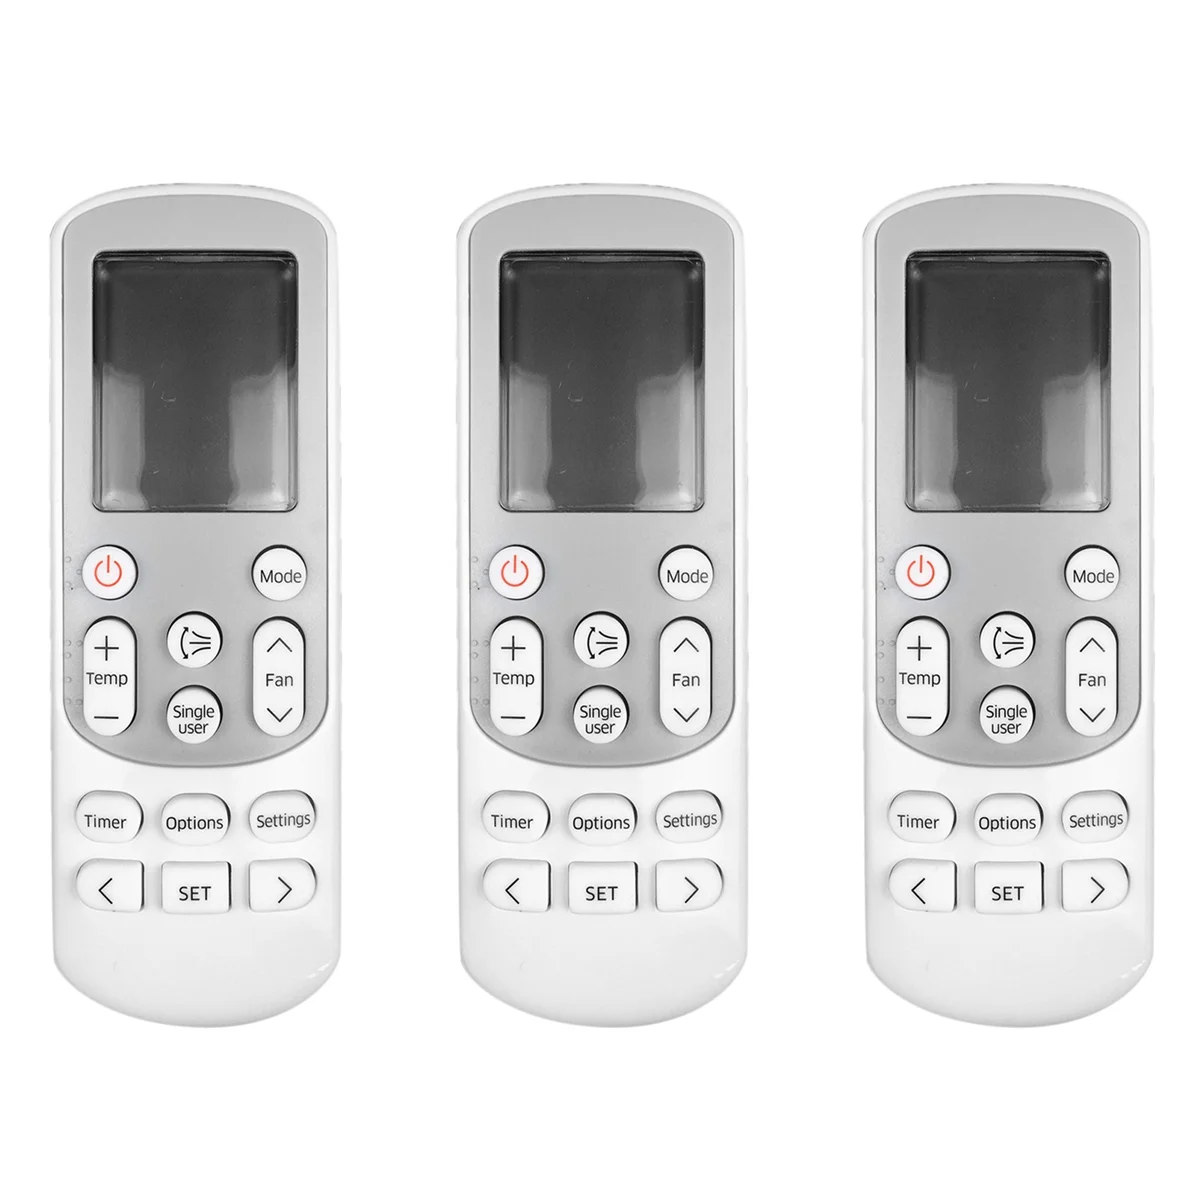 

3X Air Conditioning Remote Control Replacement Single User for Samsung DB93-15169G DB93-14643T AJ009JNNDCH DB93-15169E